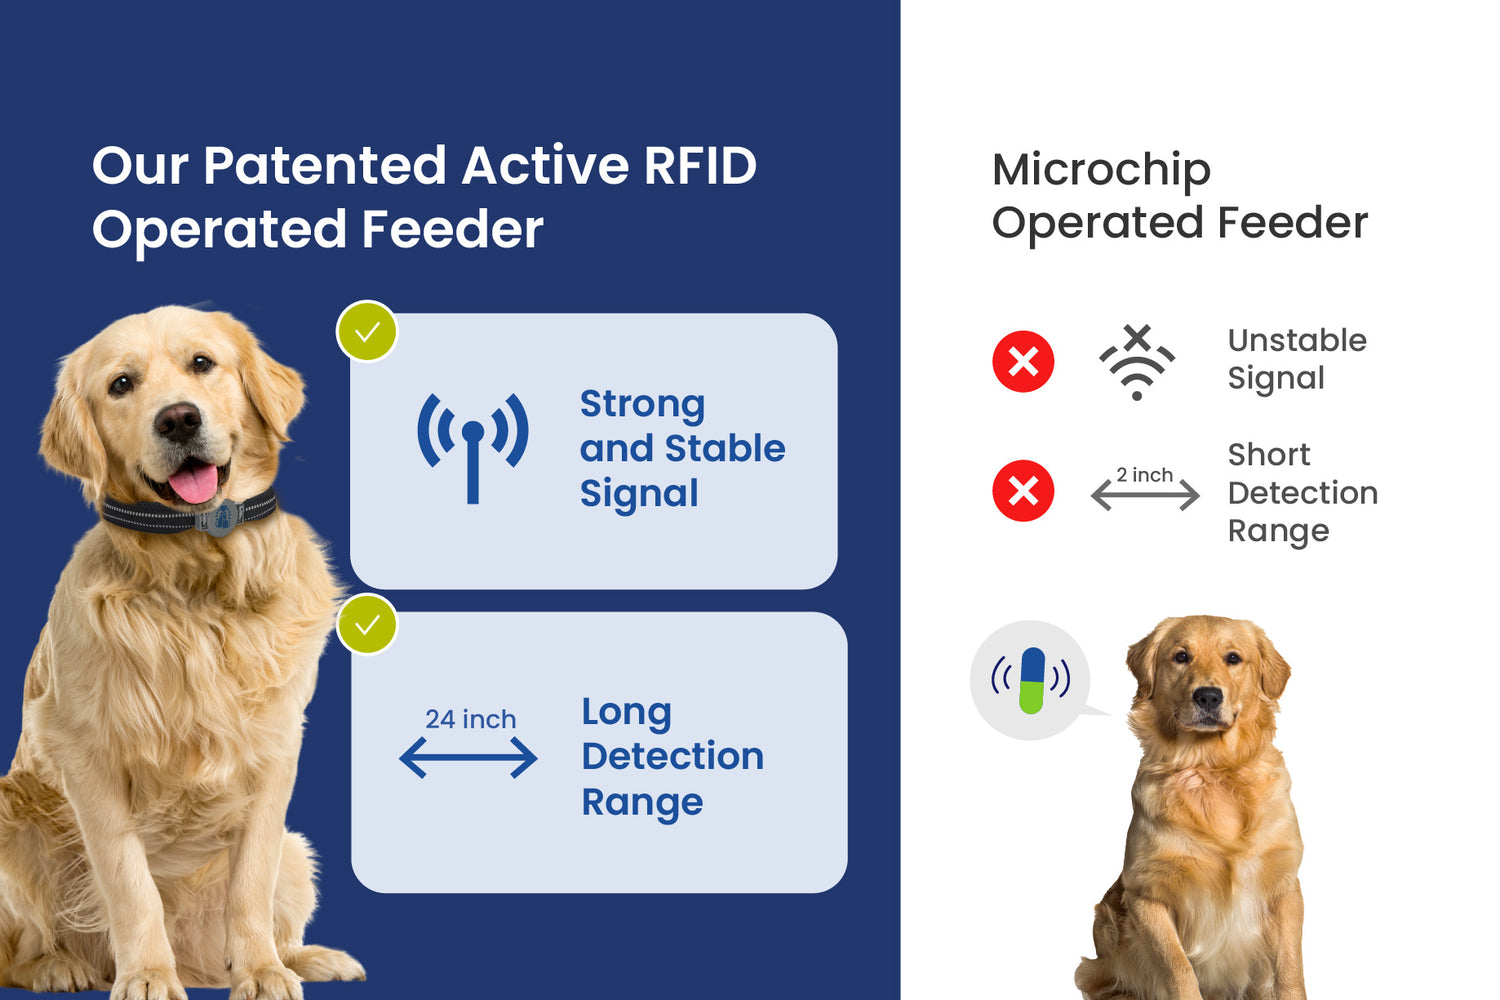 showcasing how microchip pet feeders have unstable signal and short detection range